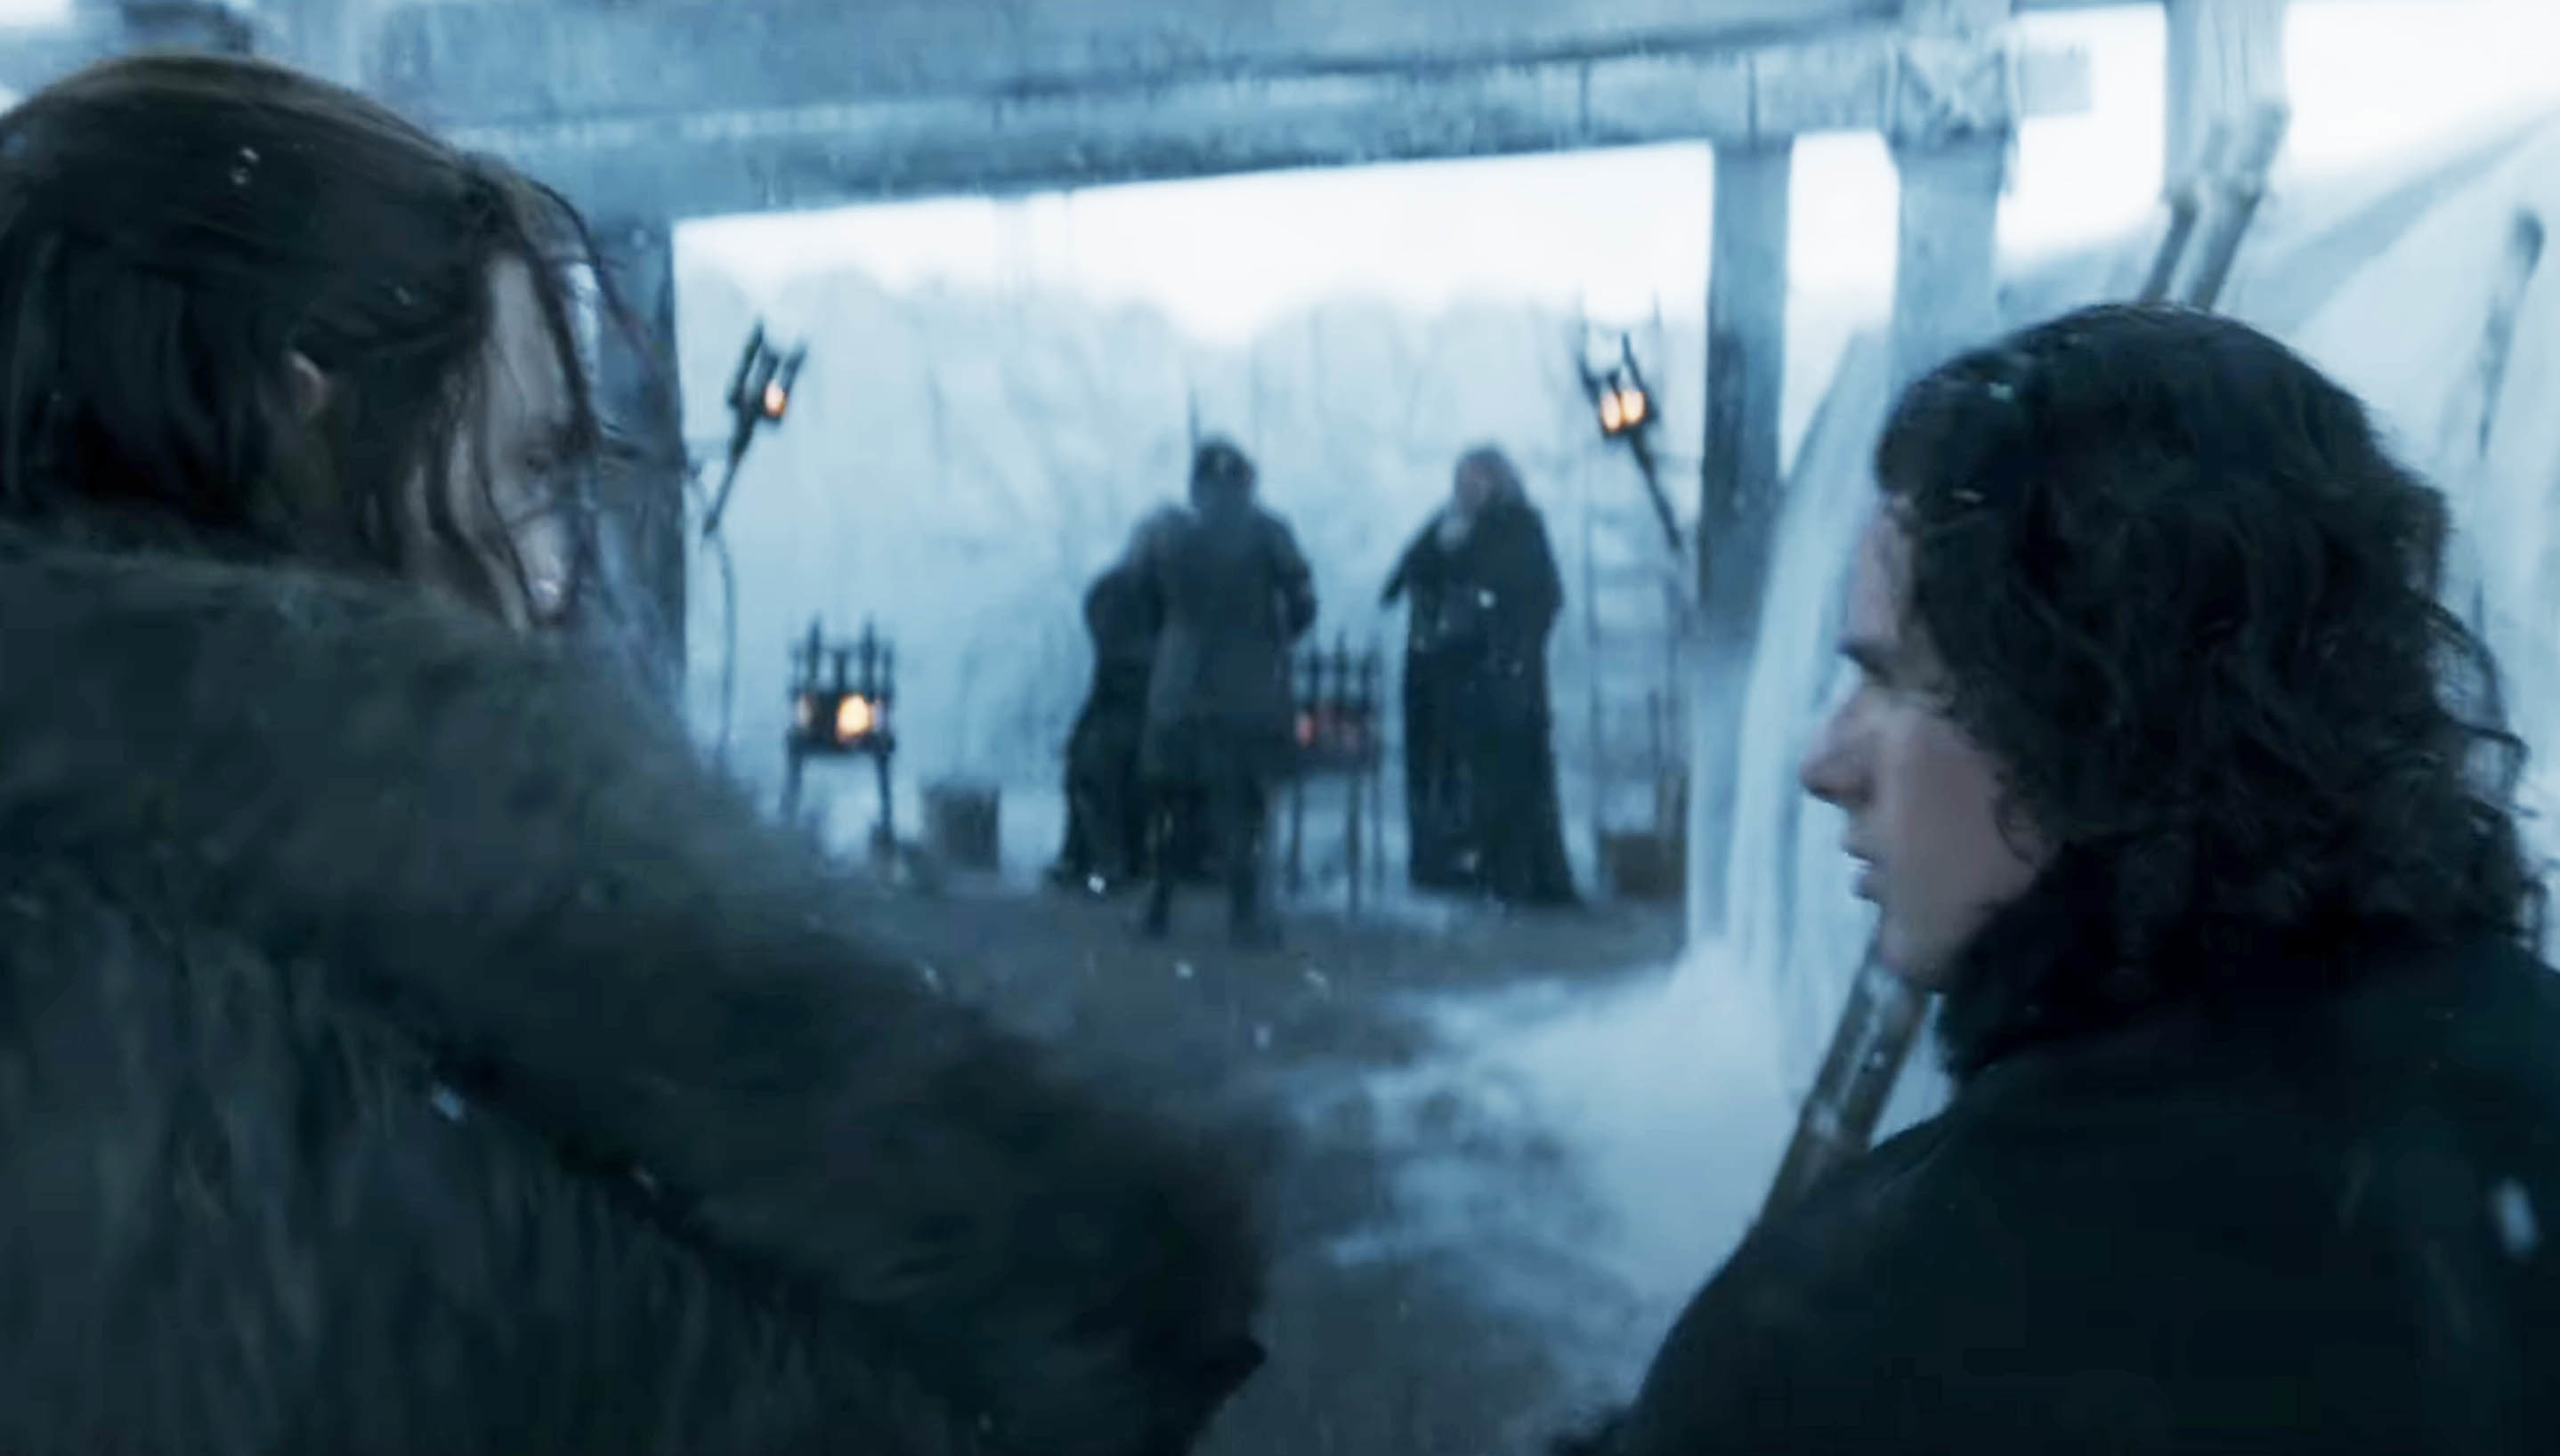 Two characters in House of the Dragon, one who appears to be Cregan Stark, walking The Wall